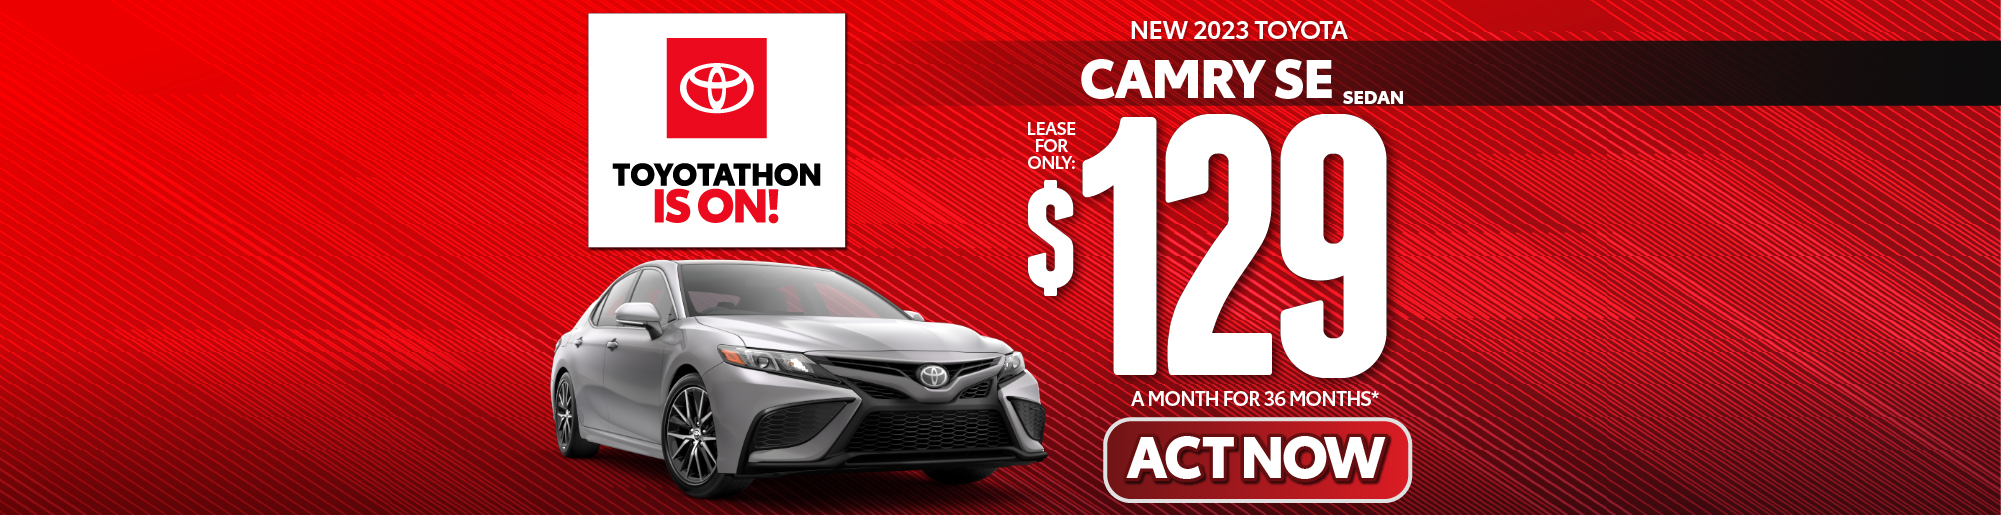 New 2022 Toyota Camry SE Sedan Lease for only $129/mo.* ACT NOW